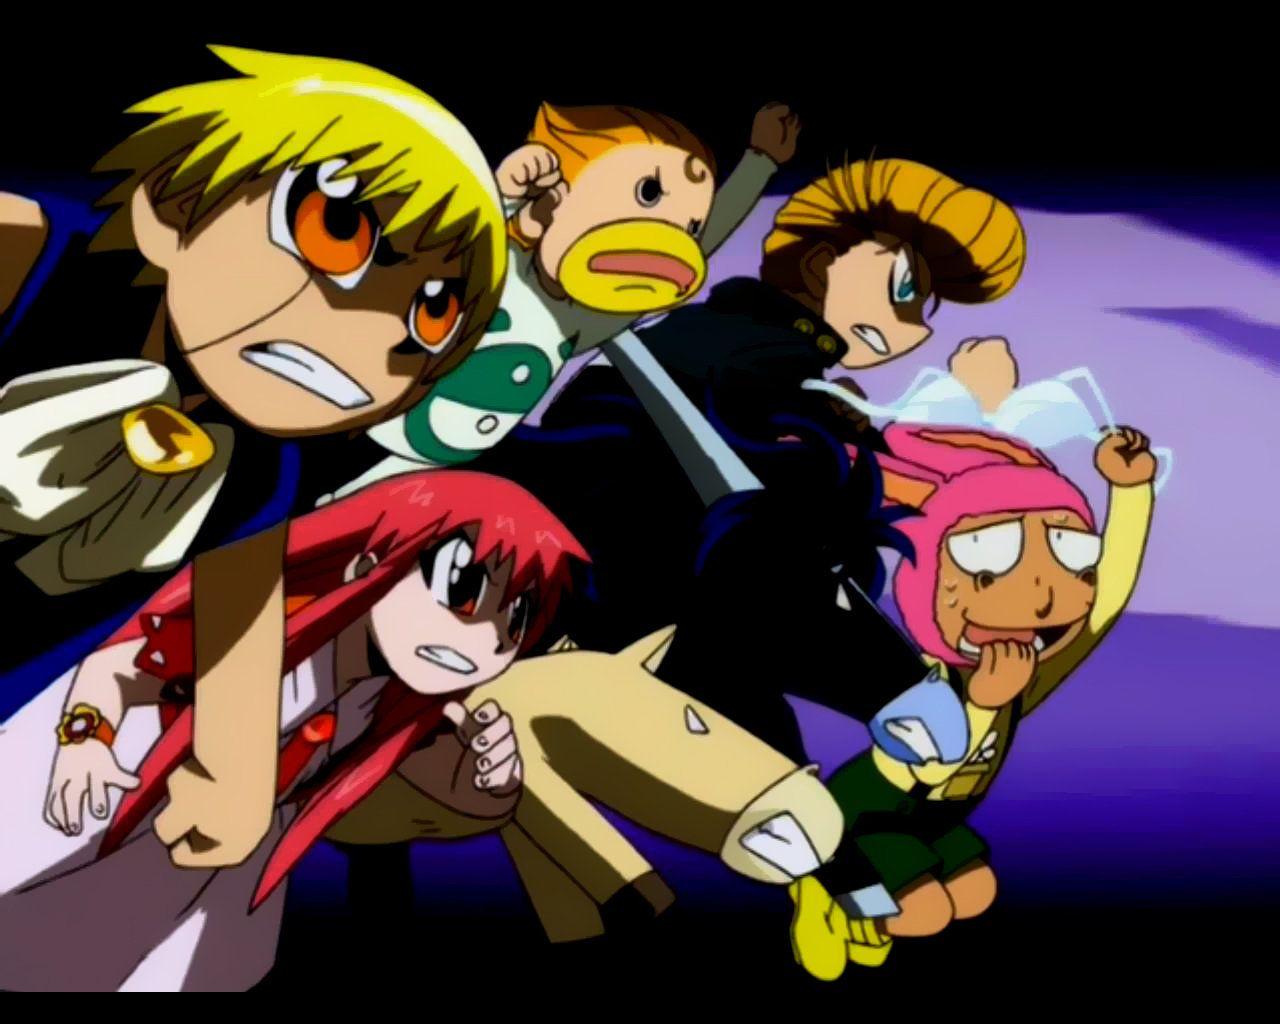 Zatch Bell and Company